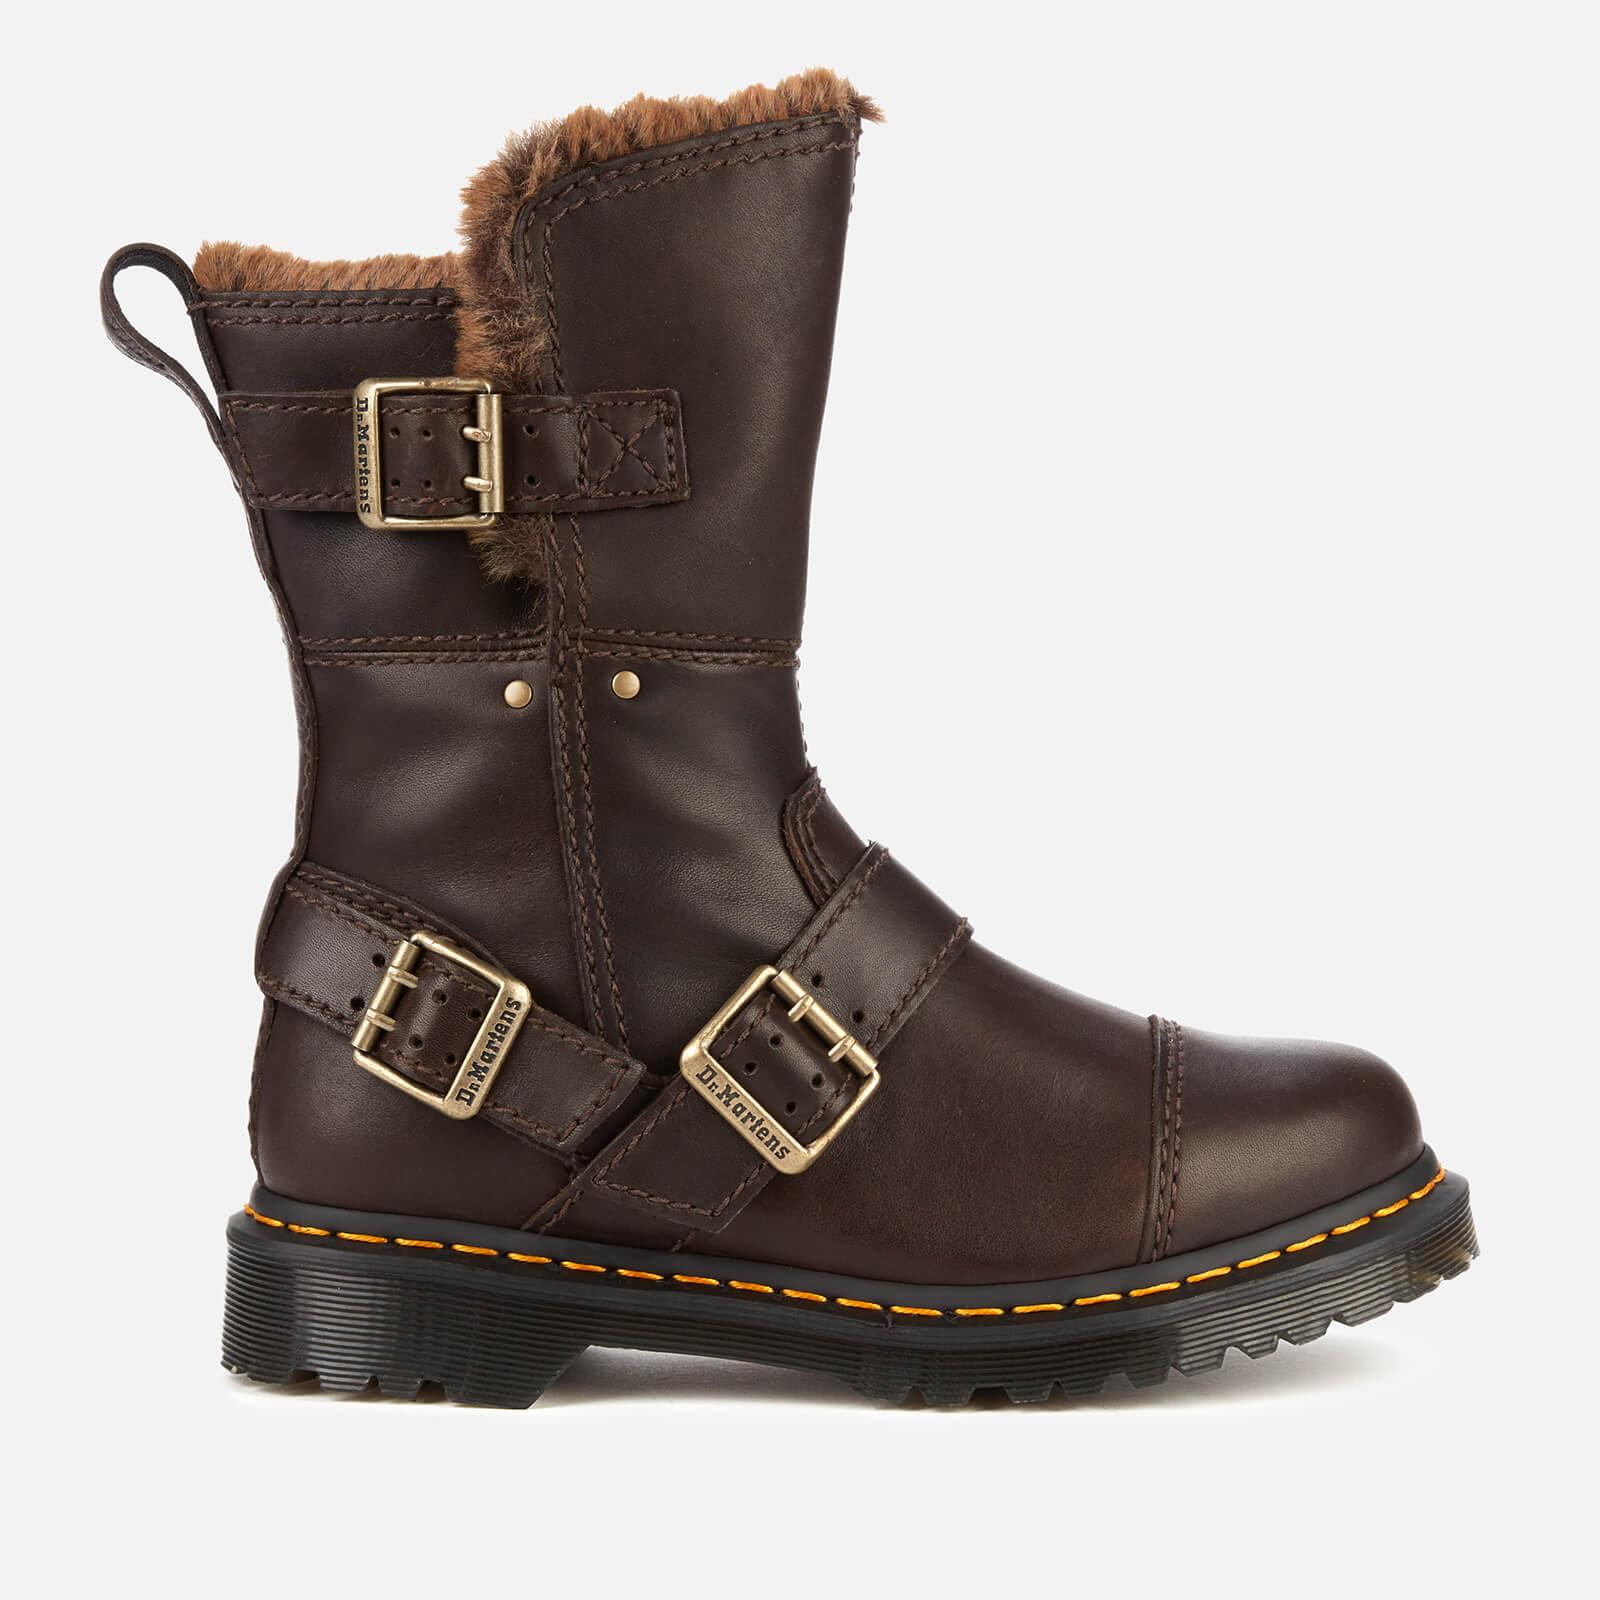 Dr. Martens Kristy Mid Leather Biker Boots in Brown - Lyst